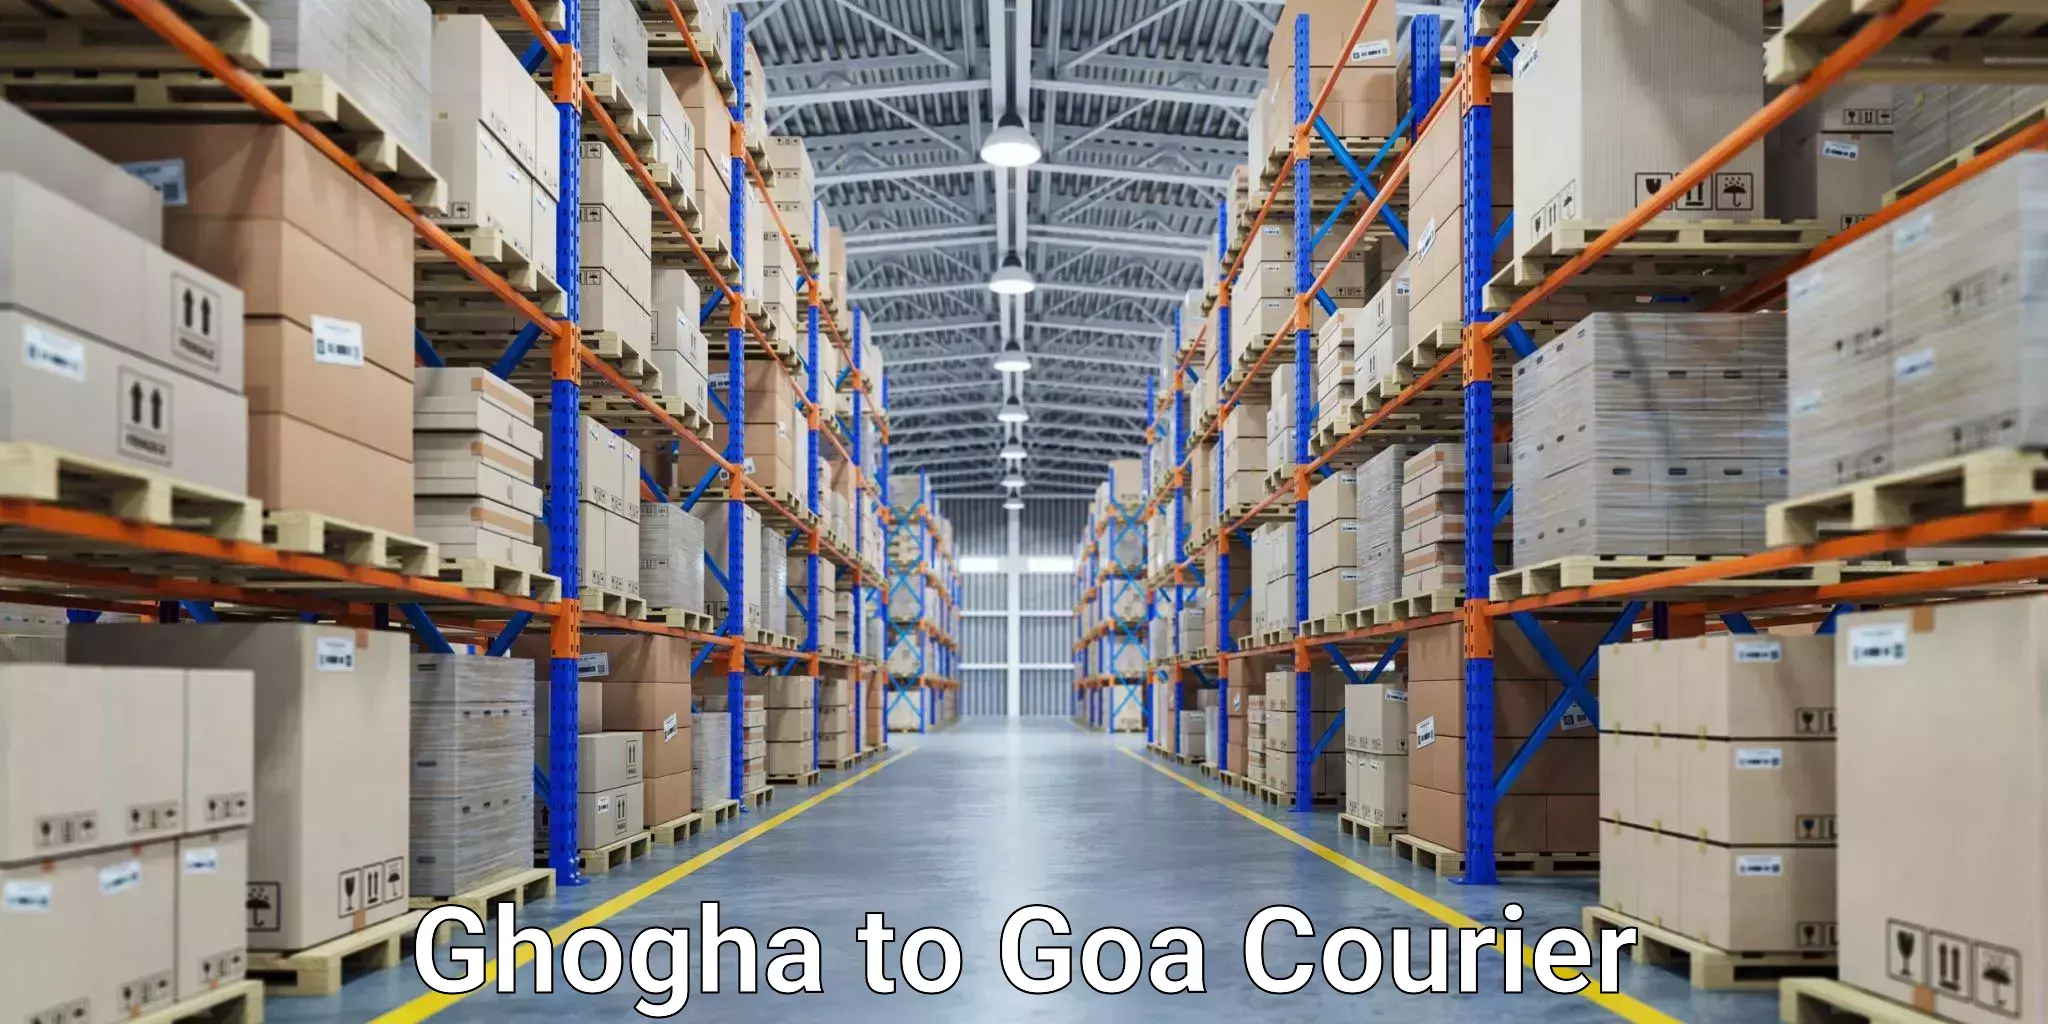 Overnight delivery services Ghogha to Goa